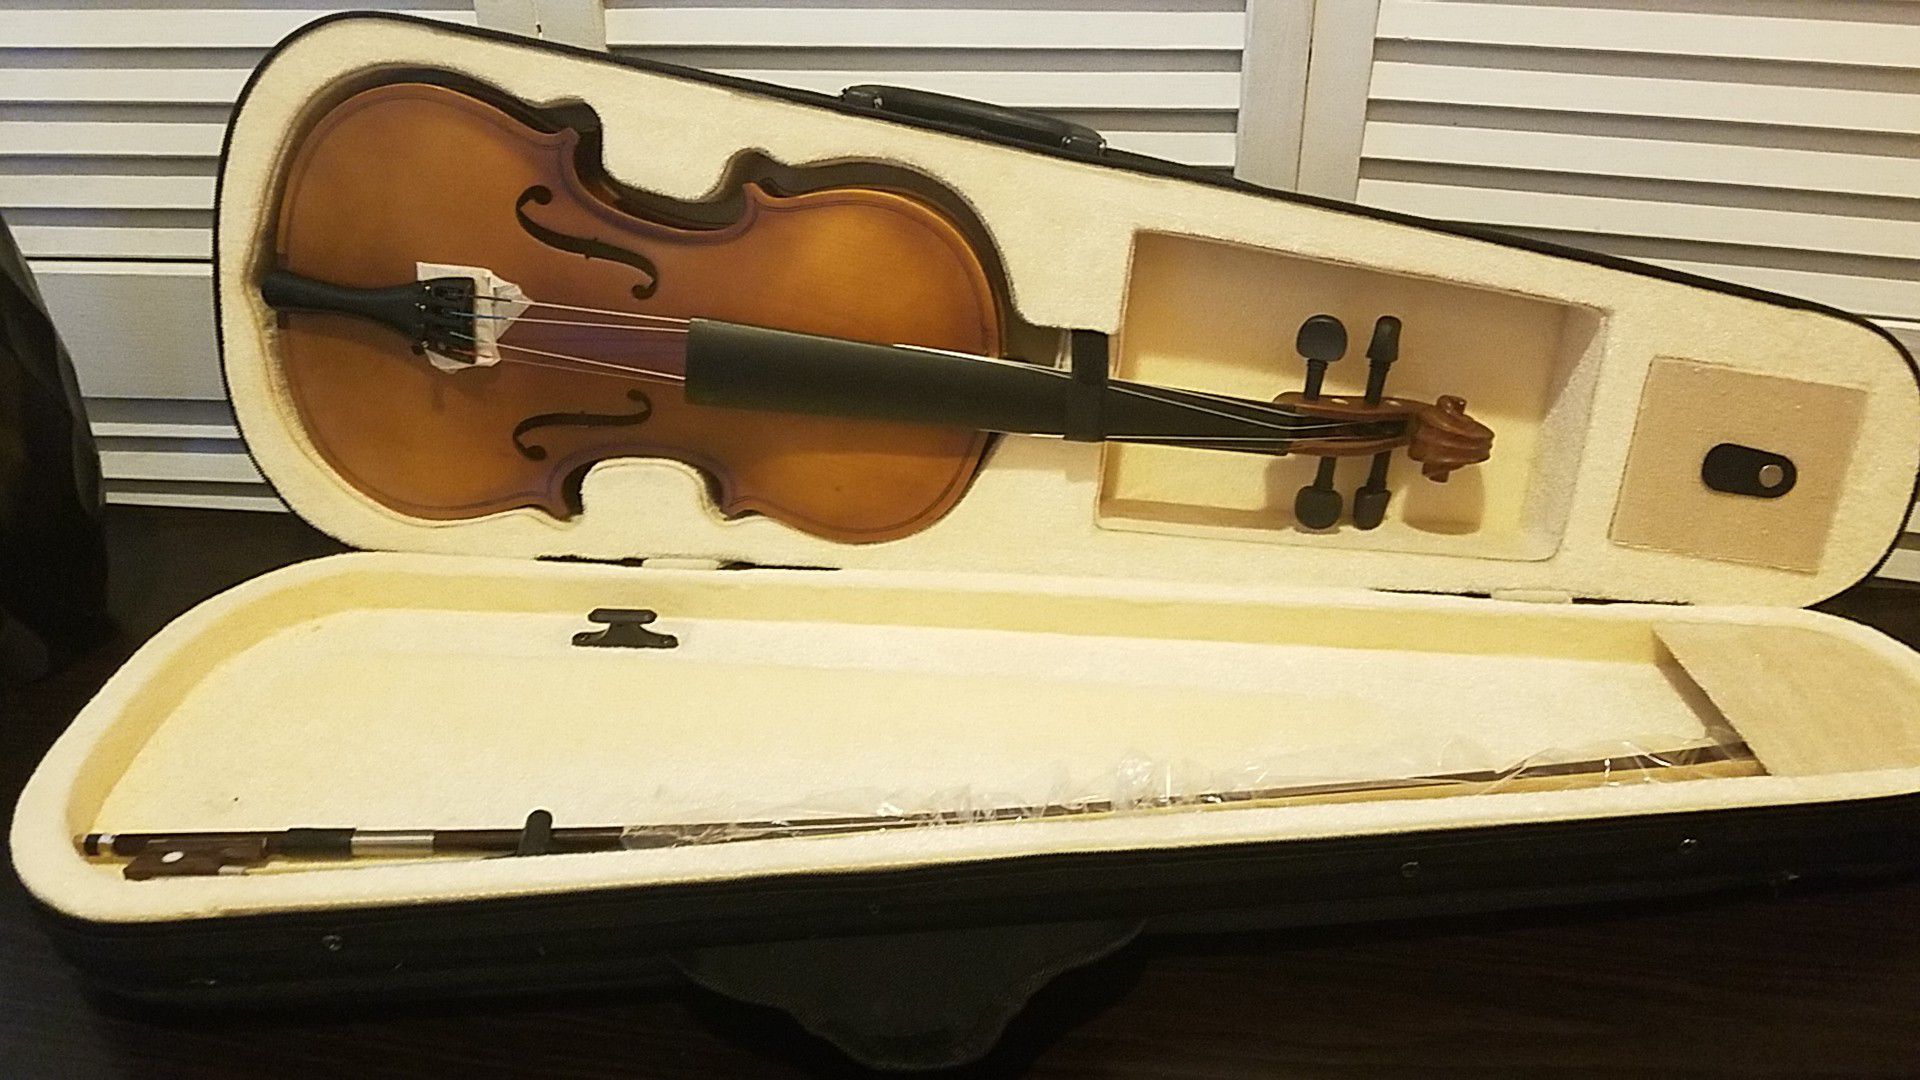 2 New violins, never used 4/4 both. Essential Elements 2000 for strings book included